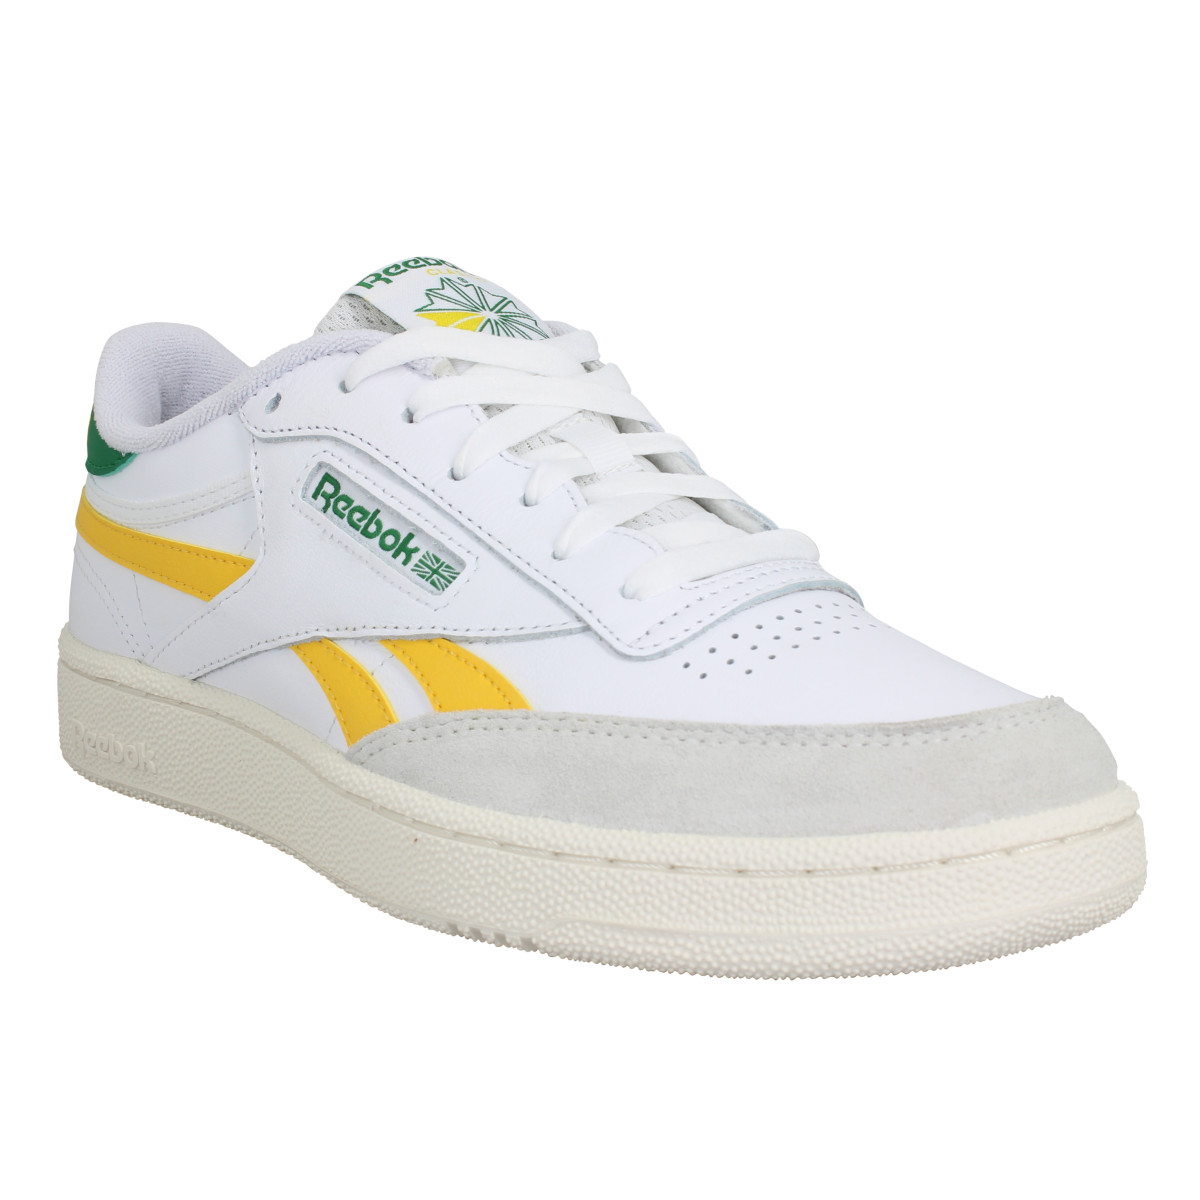 Reebok club c revenge cuir homme white yellow homme | Fanny chaussures